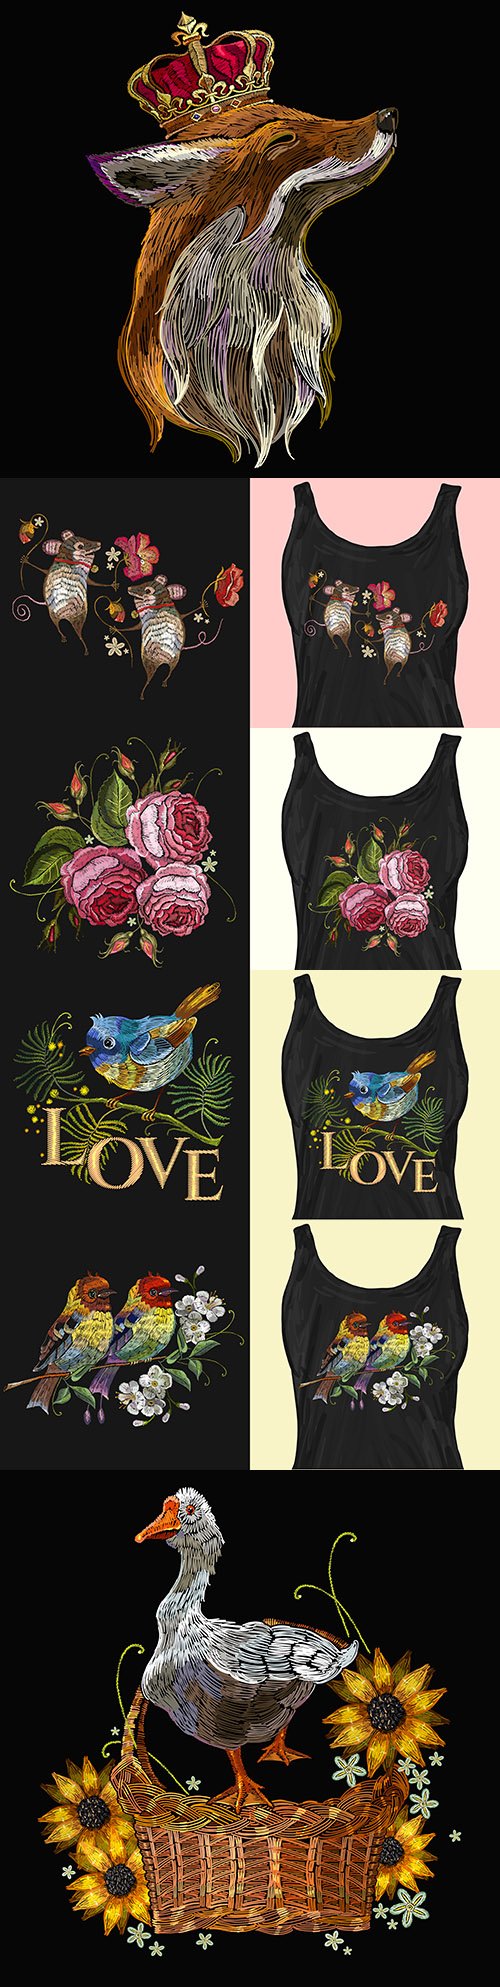 Decorative embroidery with flowers for design on clothing